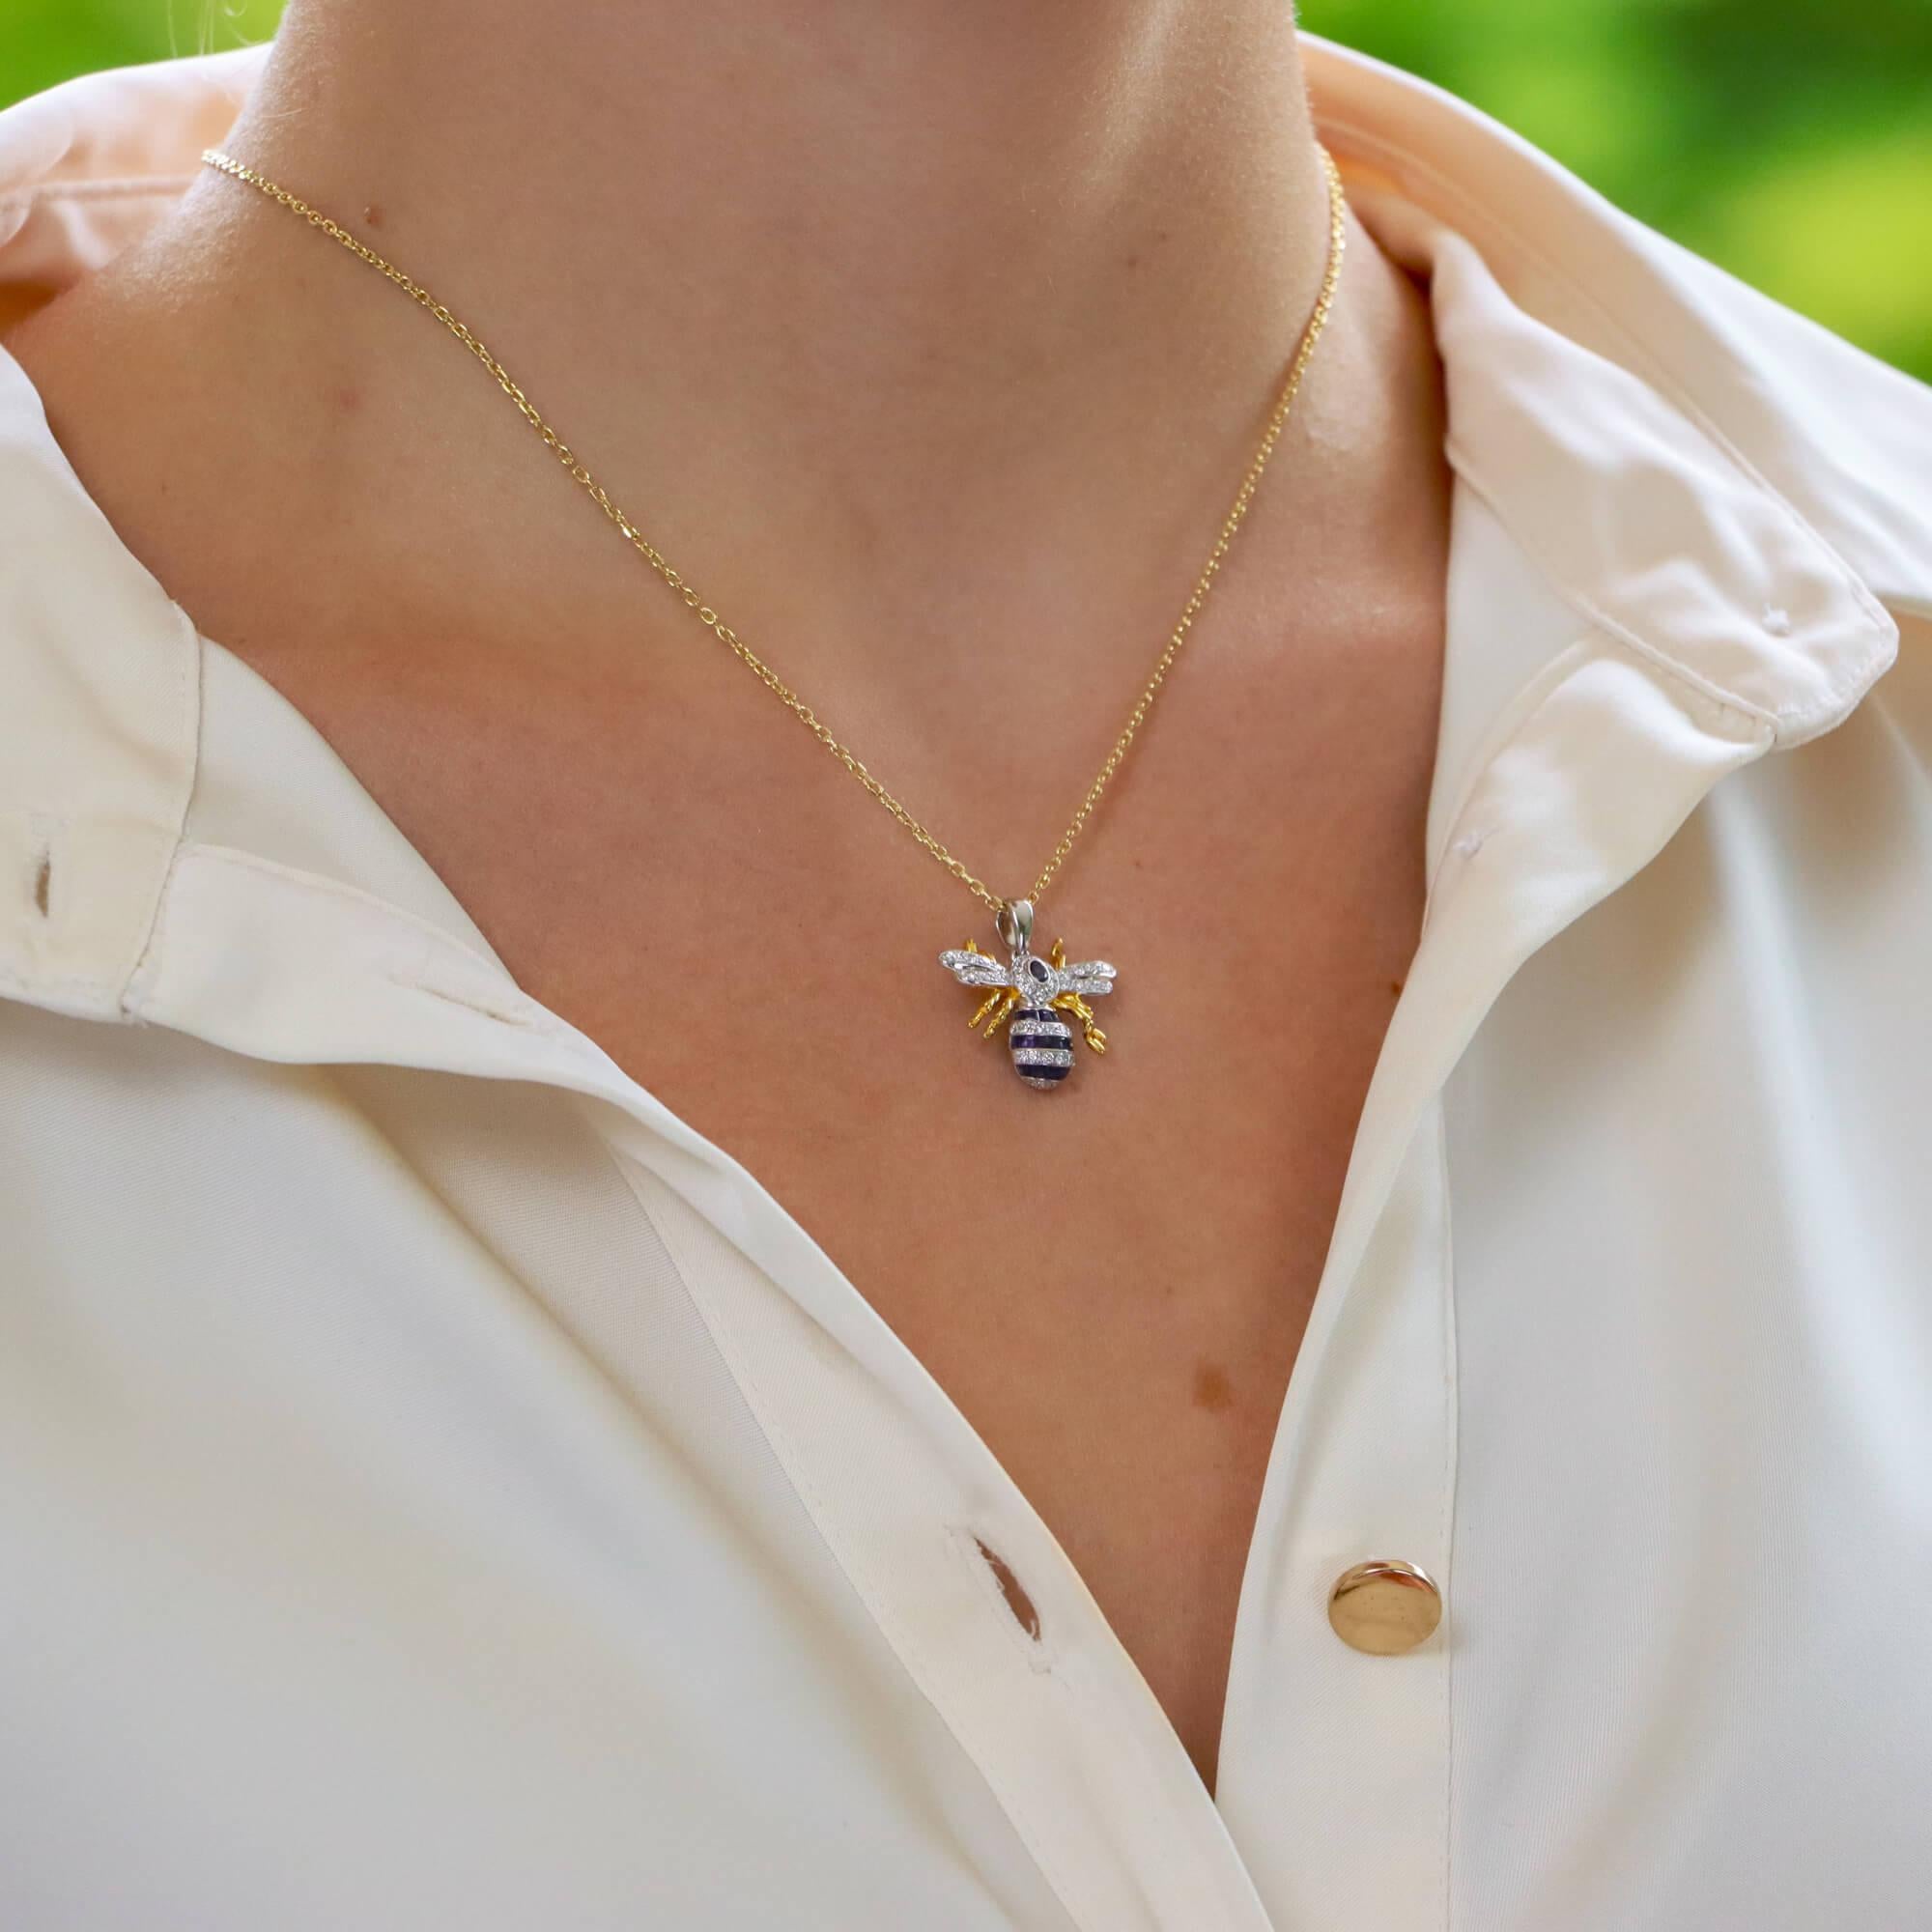  A beautiful sapphire and diamond bee pendant necklace set in 18k yellow and white gold.

The bee has been expertly handcrafted in England and is primarily set with French cut sapphires and round brilliant cut diamonds. The bee is further accented